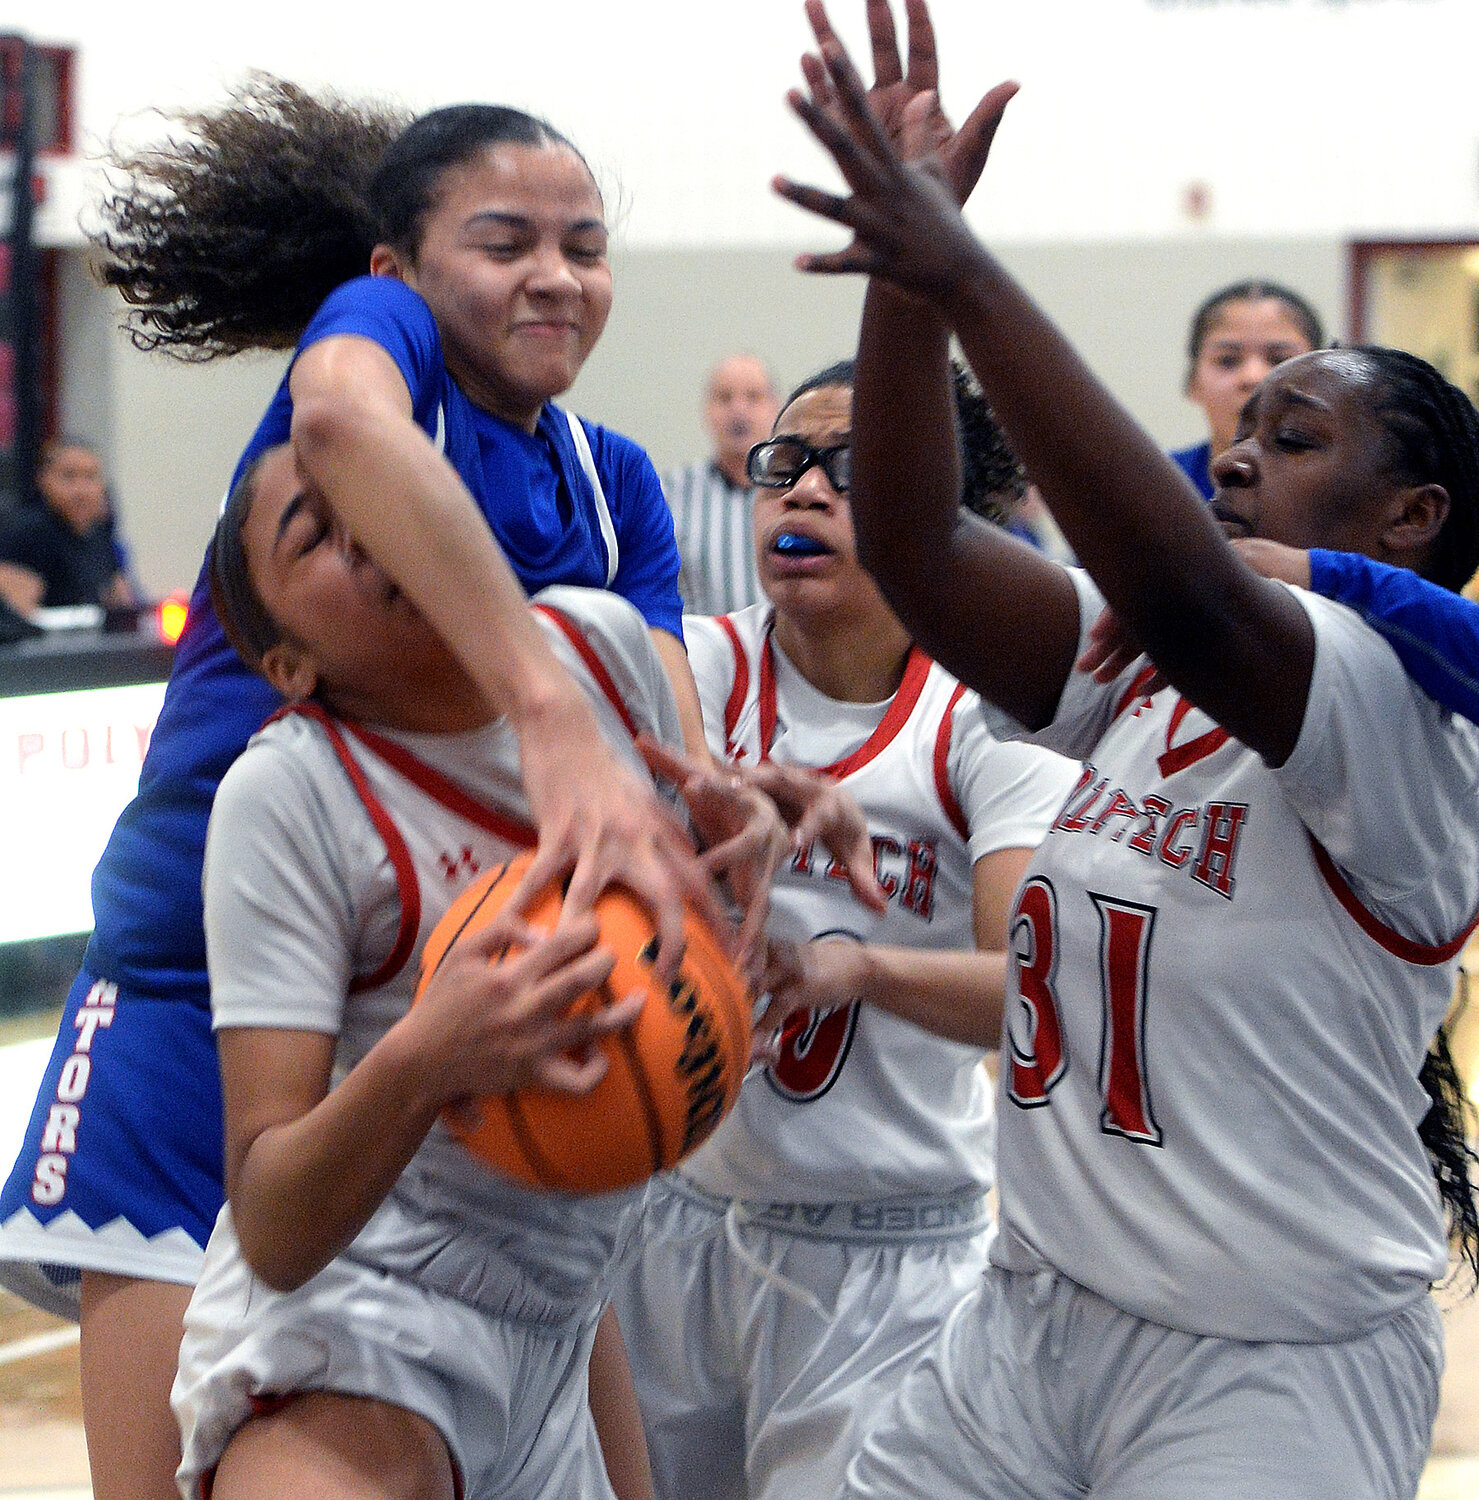 De’Janae Gibson of Polytech comes down with a defensive rebound as Dover’s Malya Milstead reaches in during the second quarter.  SPECIAL TO THE DAILY STATE NEWS/GARY EMEIGH